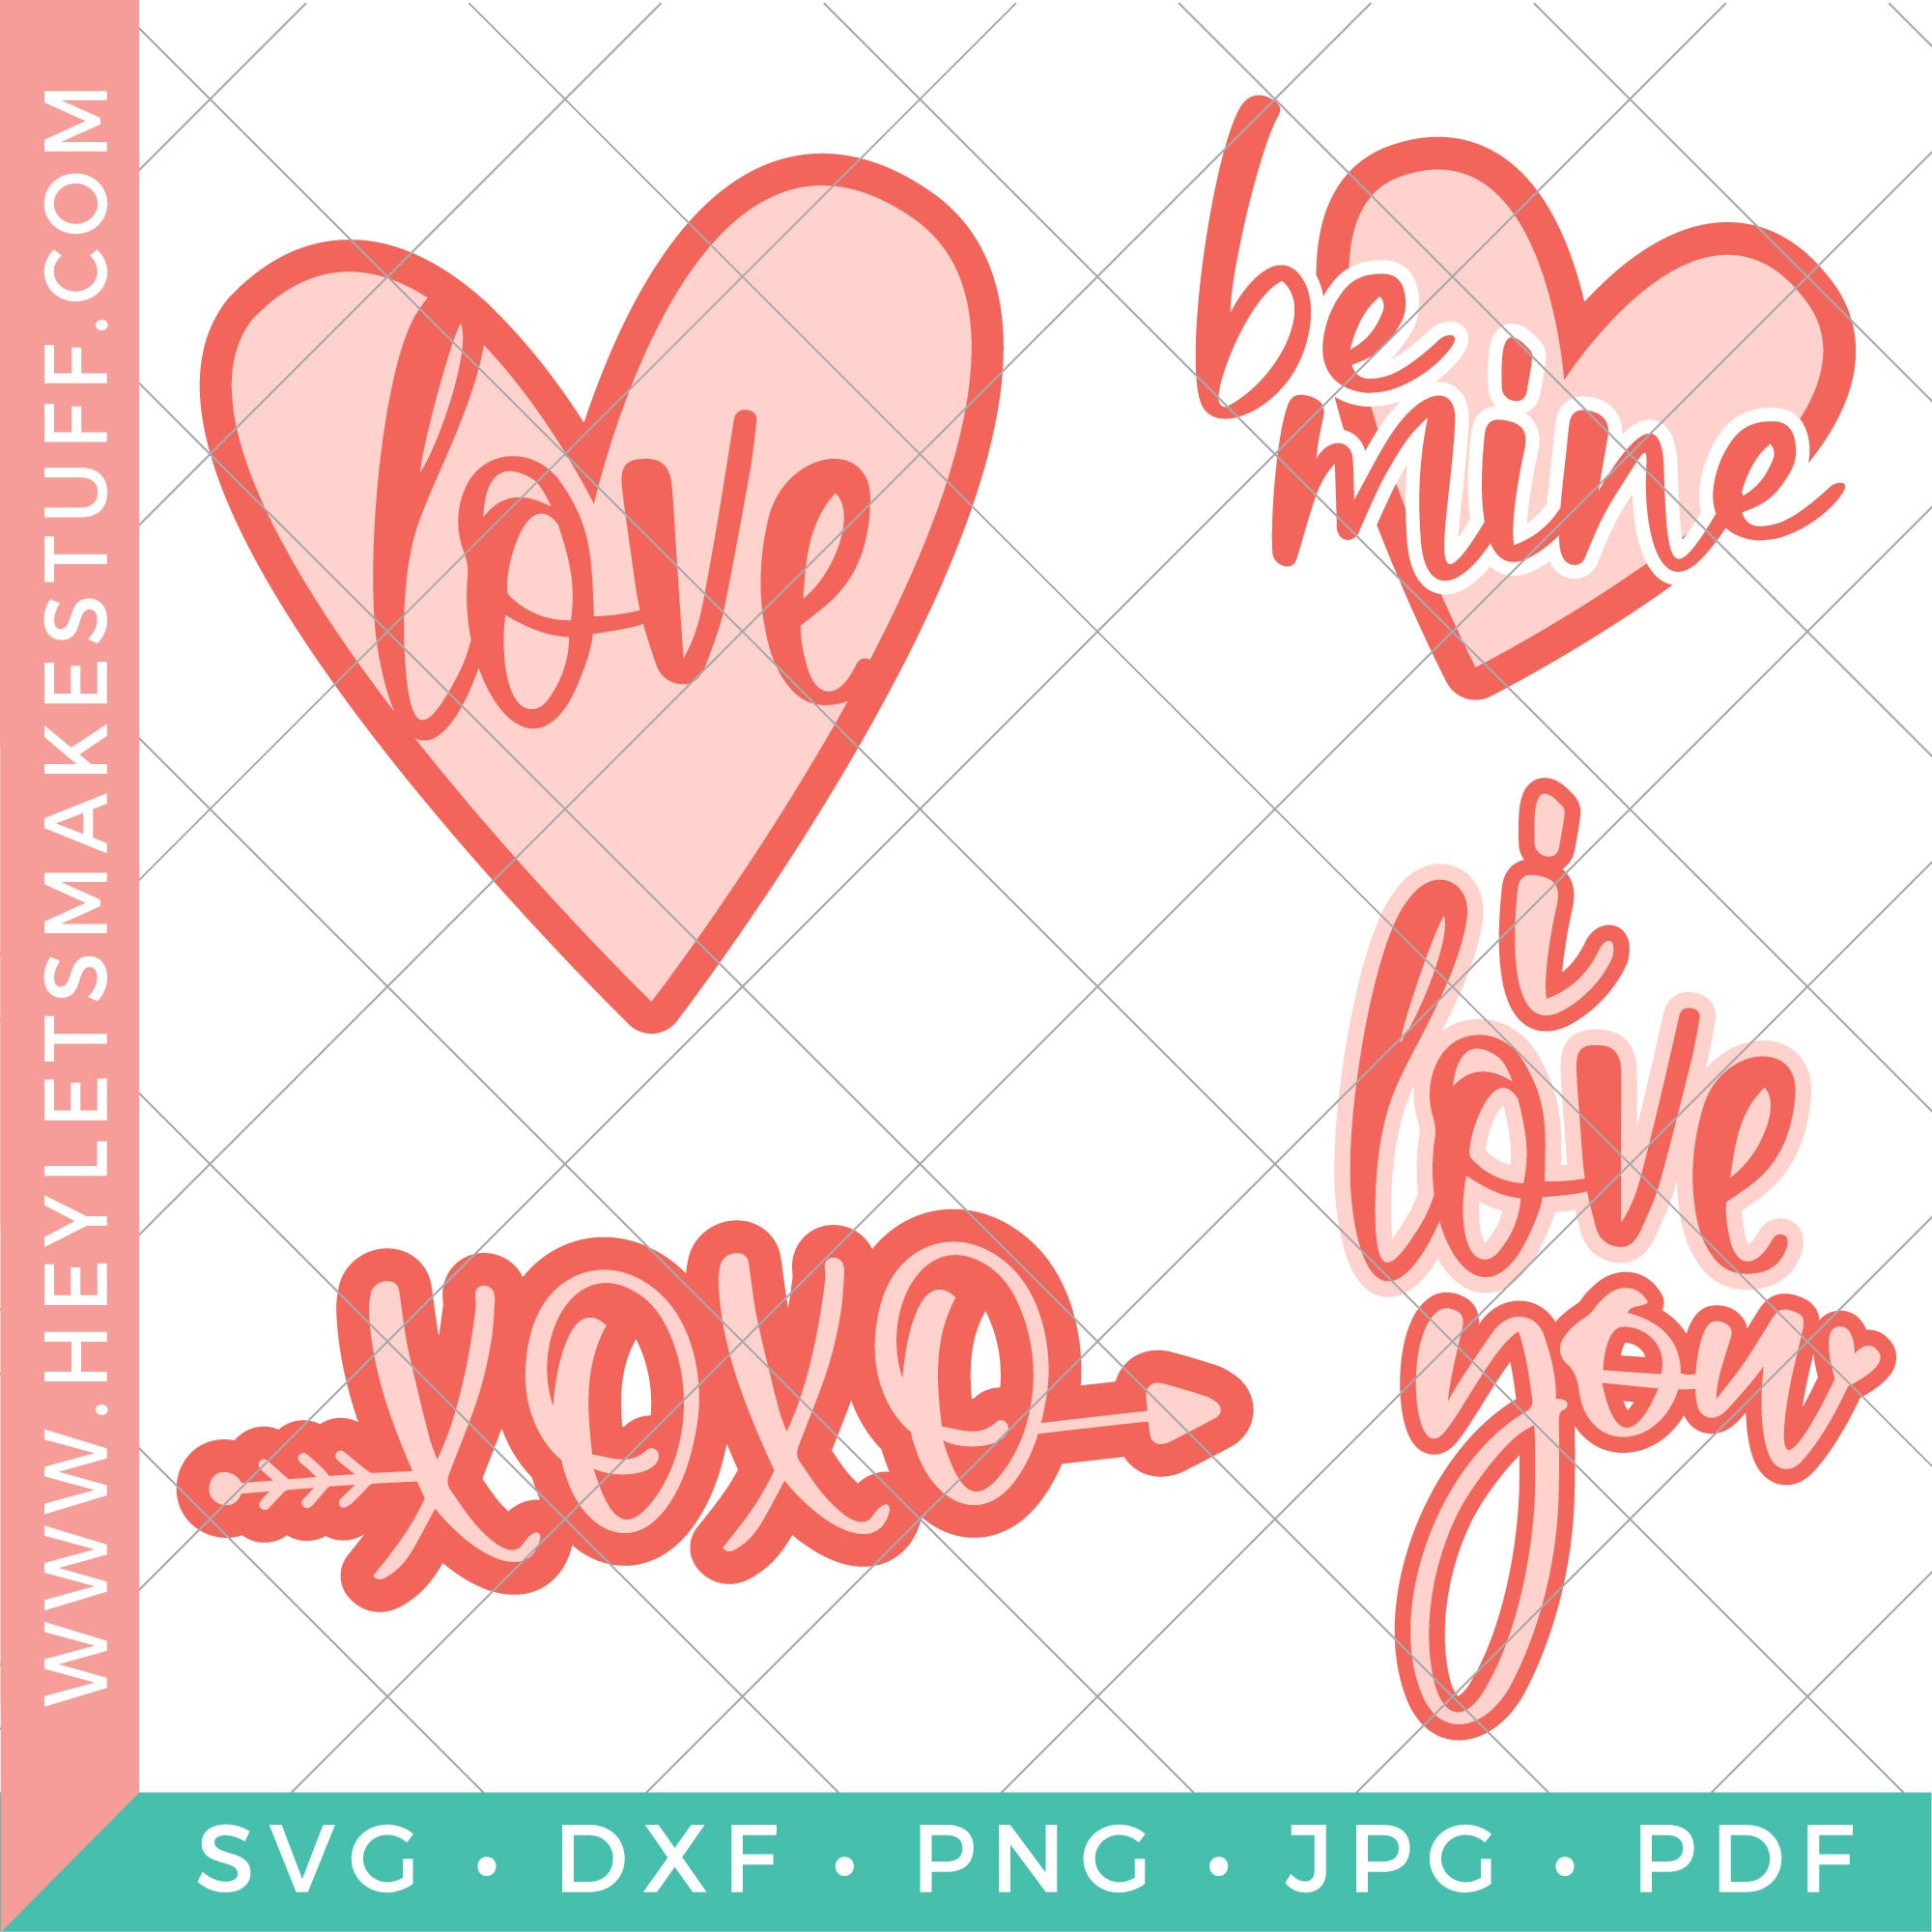 Download Visual Arts Arrow Love Svg Family Cut File Commercial Use Love Svg Files For Silhouette Vinyl Htv Clip Art Family Arrow Cricut Craft Supplies Tools